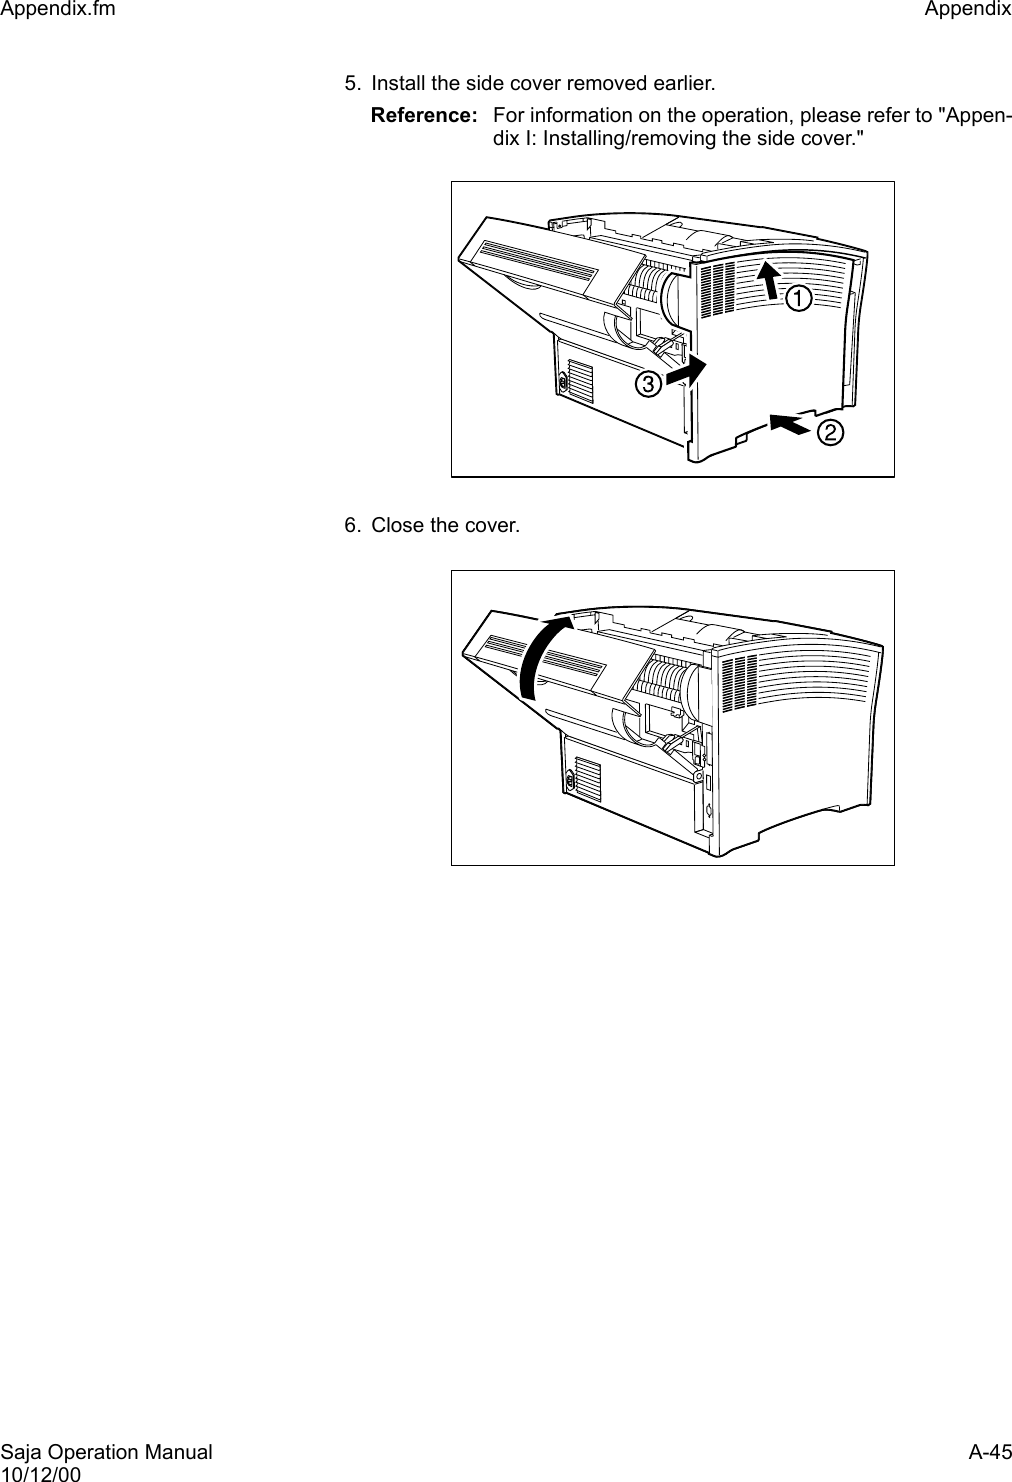 Saja Operation Manual A-4510/12/00Appendix.fm Appendix 5. Install the side cover removed earlier.Reference: For information on the operation, please refer to &quot;Appen-dix I: Installing/removing the side cover.&quot;6. Close the cover.